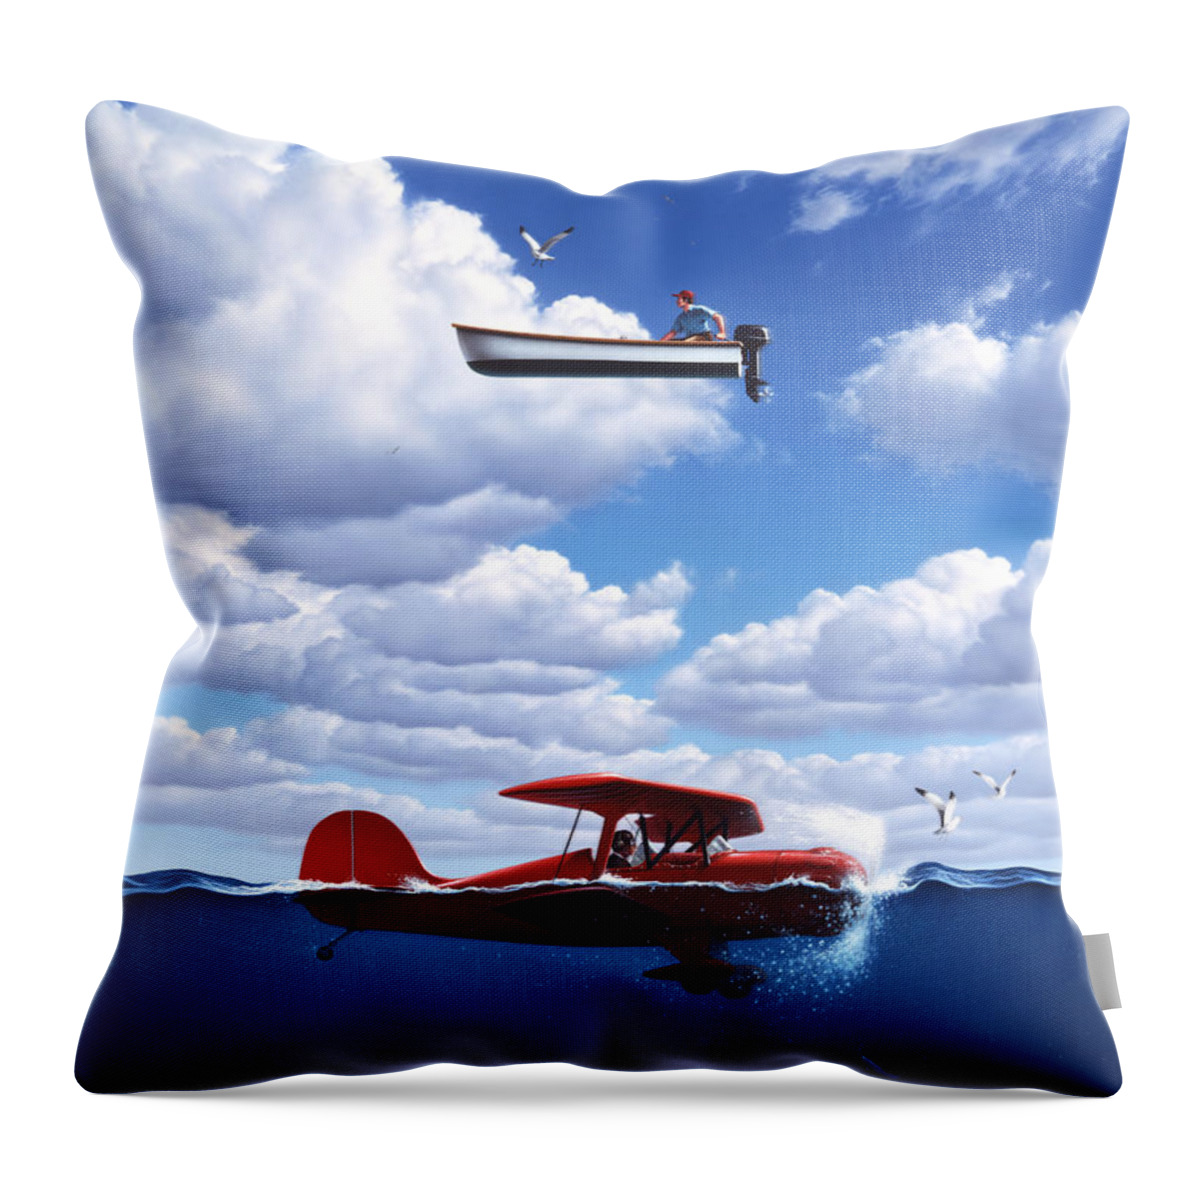 Boat Throw Pillow featuring the painting Transportation by Jerry LoFaro